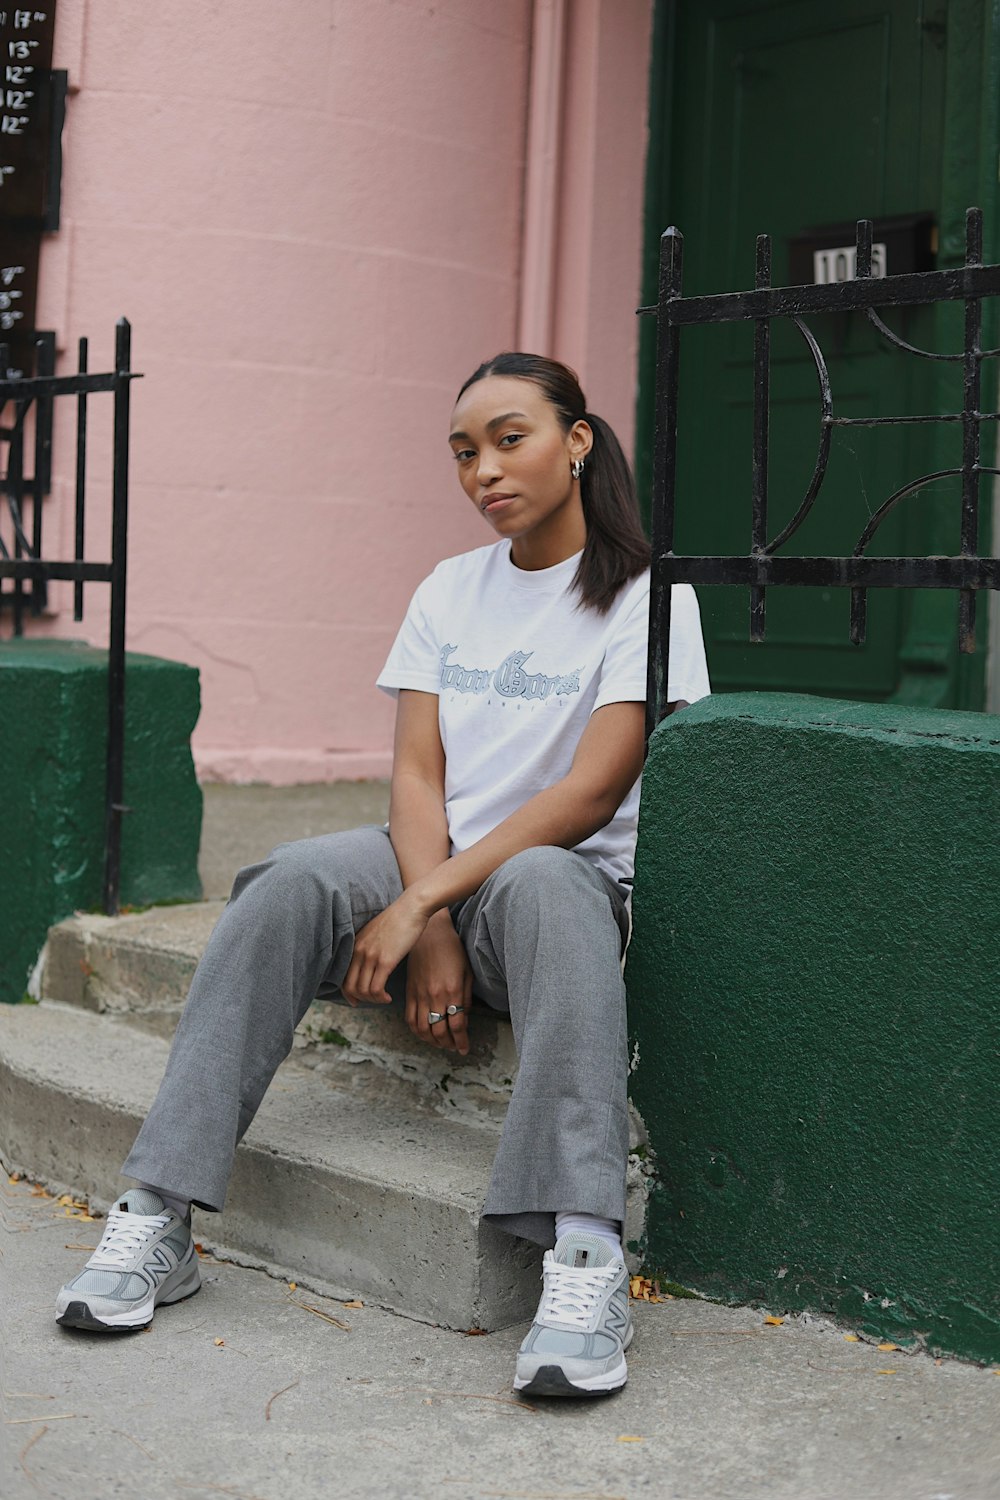 woman in white crew neck t-shirt and blue denim jeans sitting on concrete bench